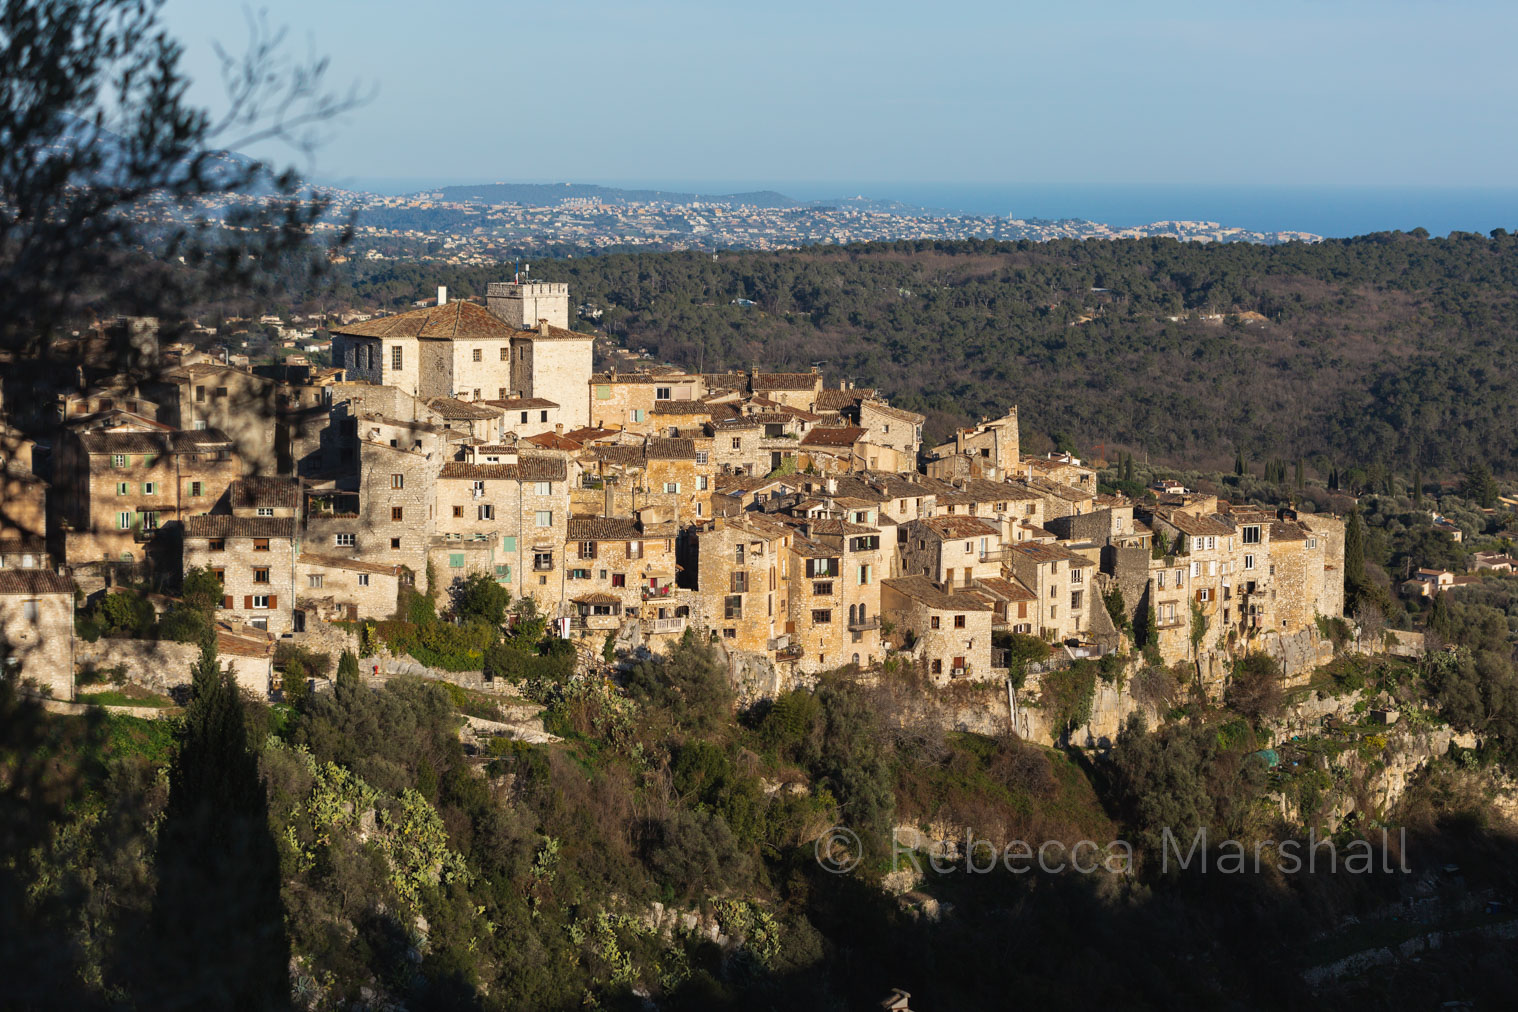 Photograph of medieval hilltop village with blue sky and sea in the background